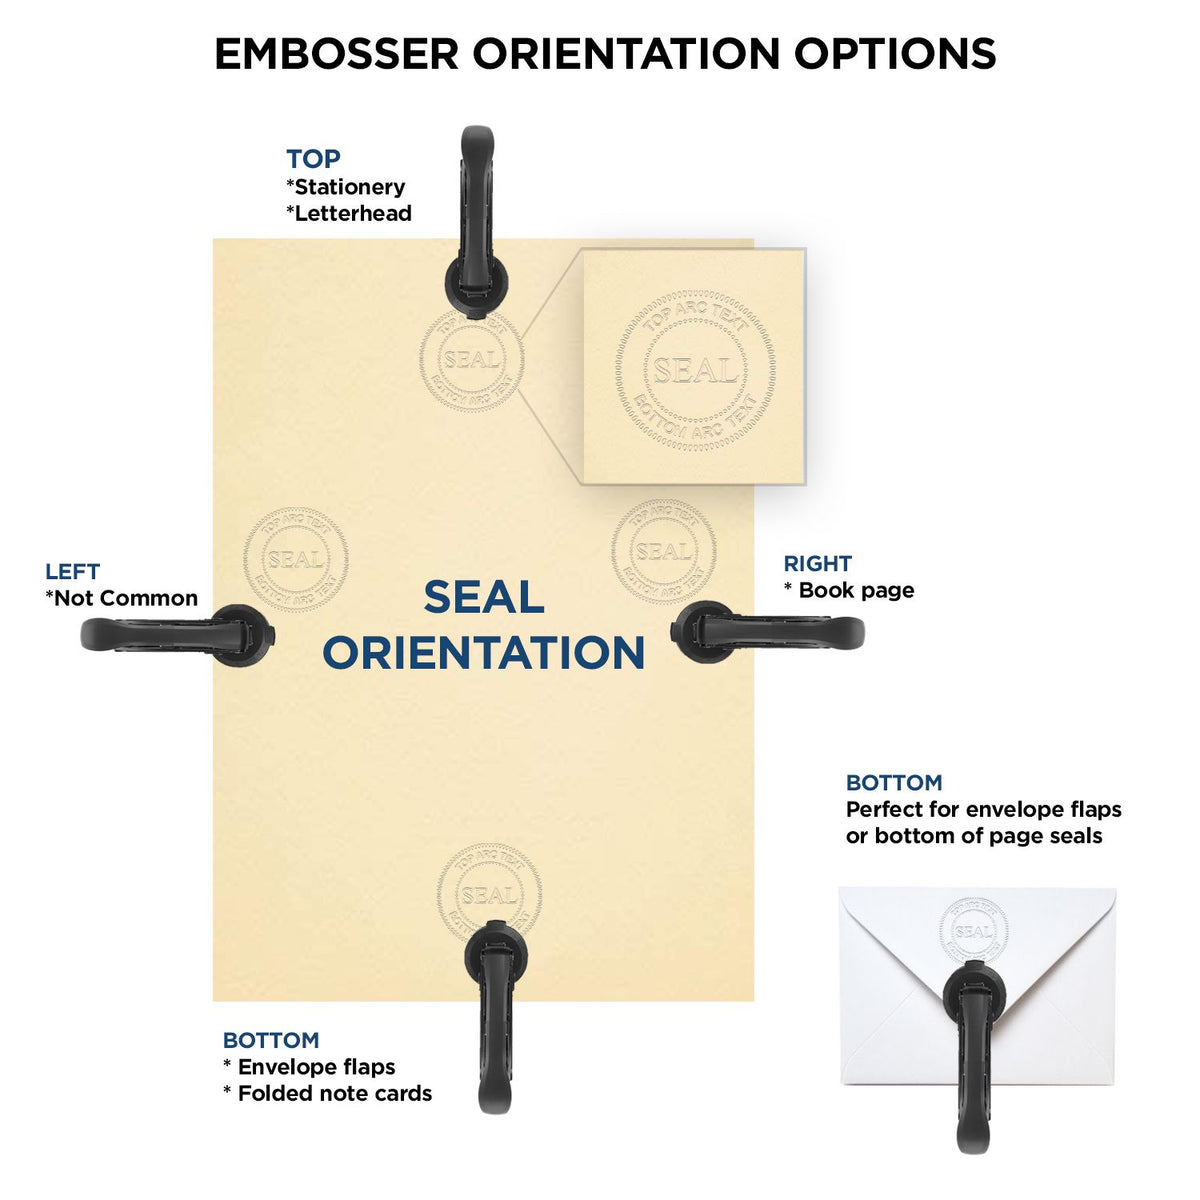 An infographic for the Handheld Rhode Island Architect Seal Embosser showing embosser orientation, this is showing examples of a top, bottom, right and left insert.